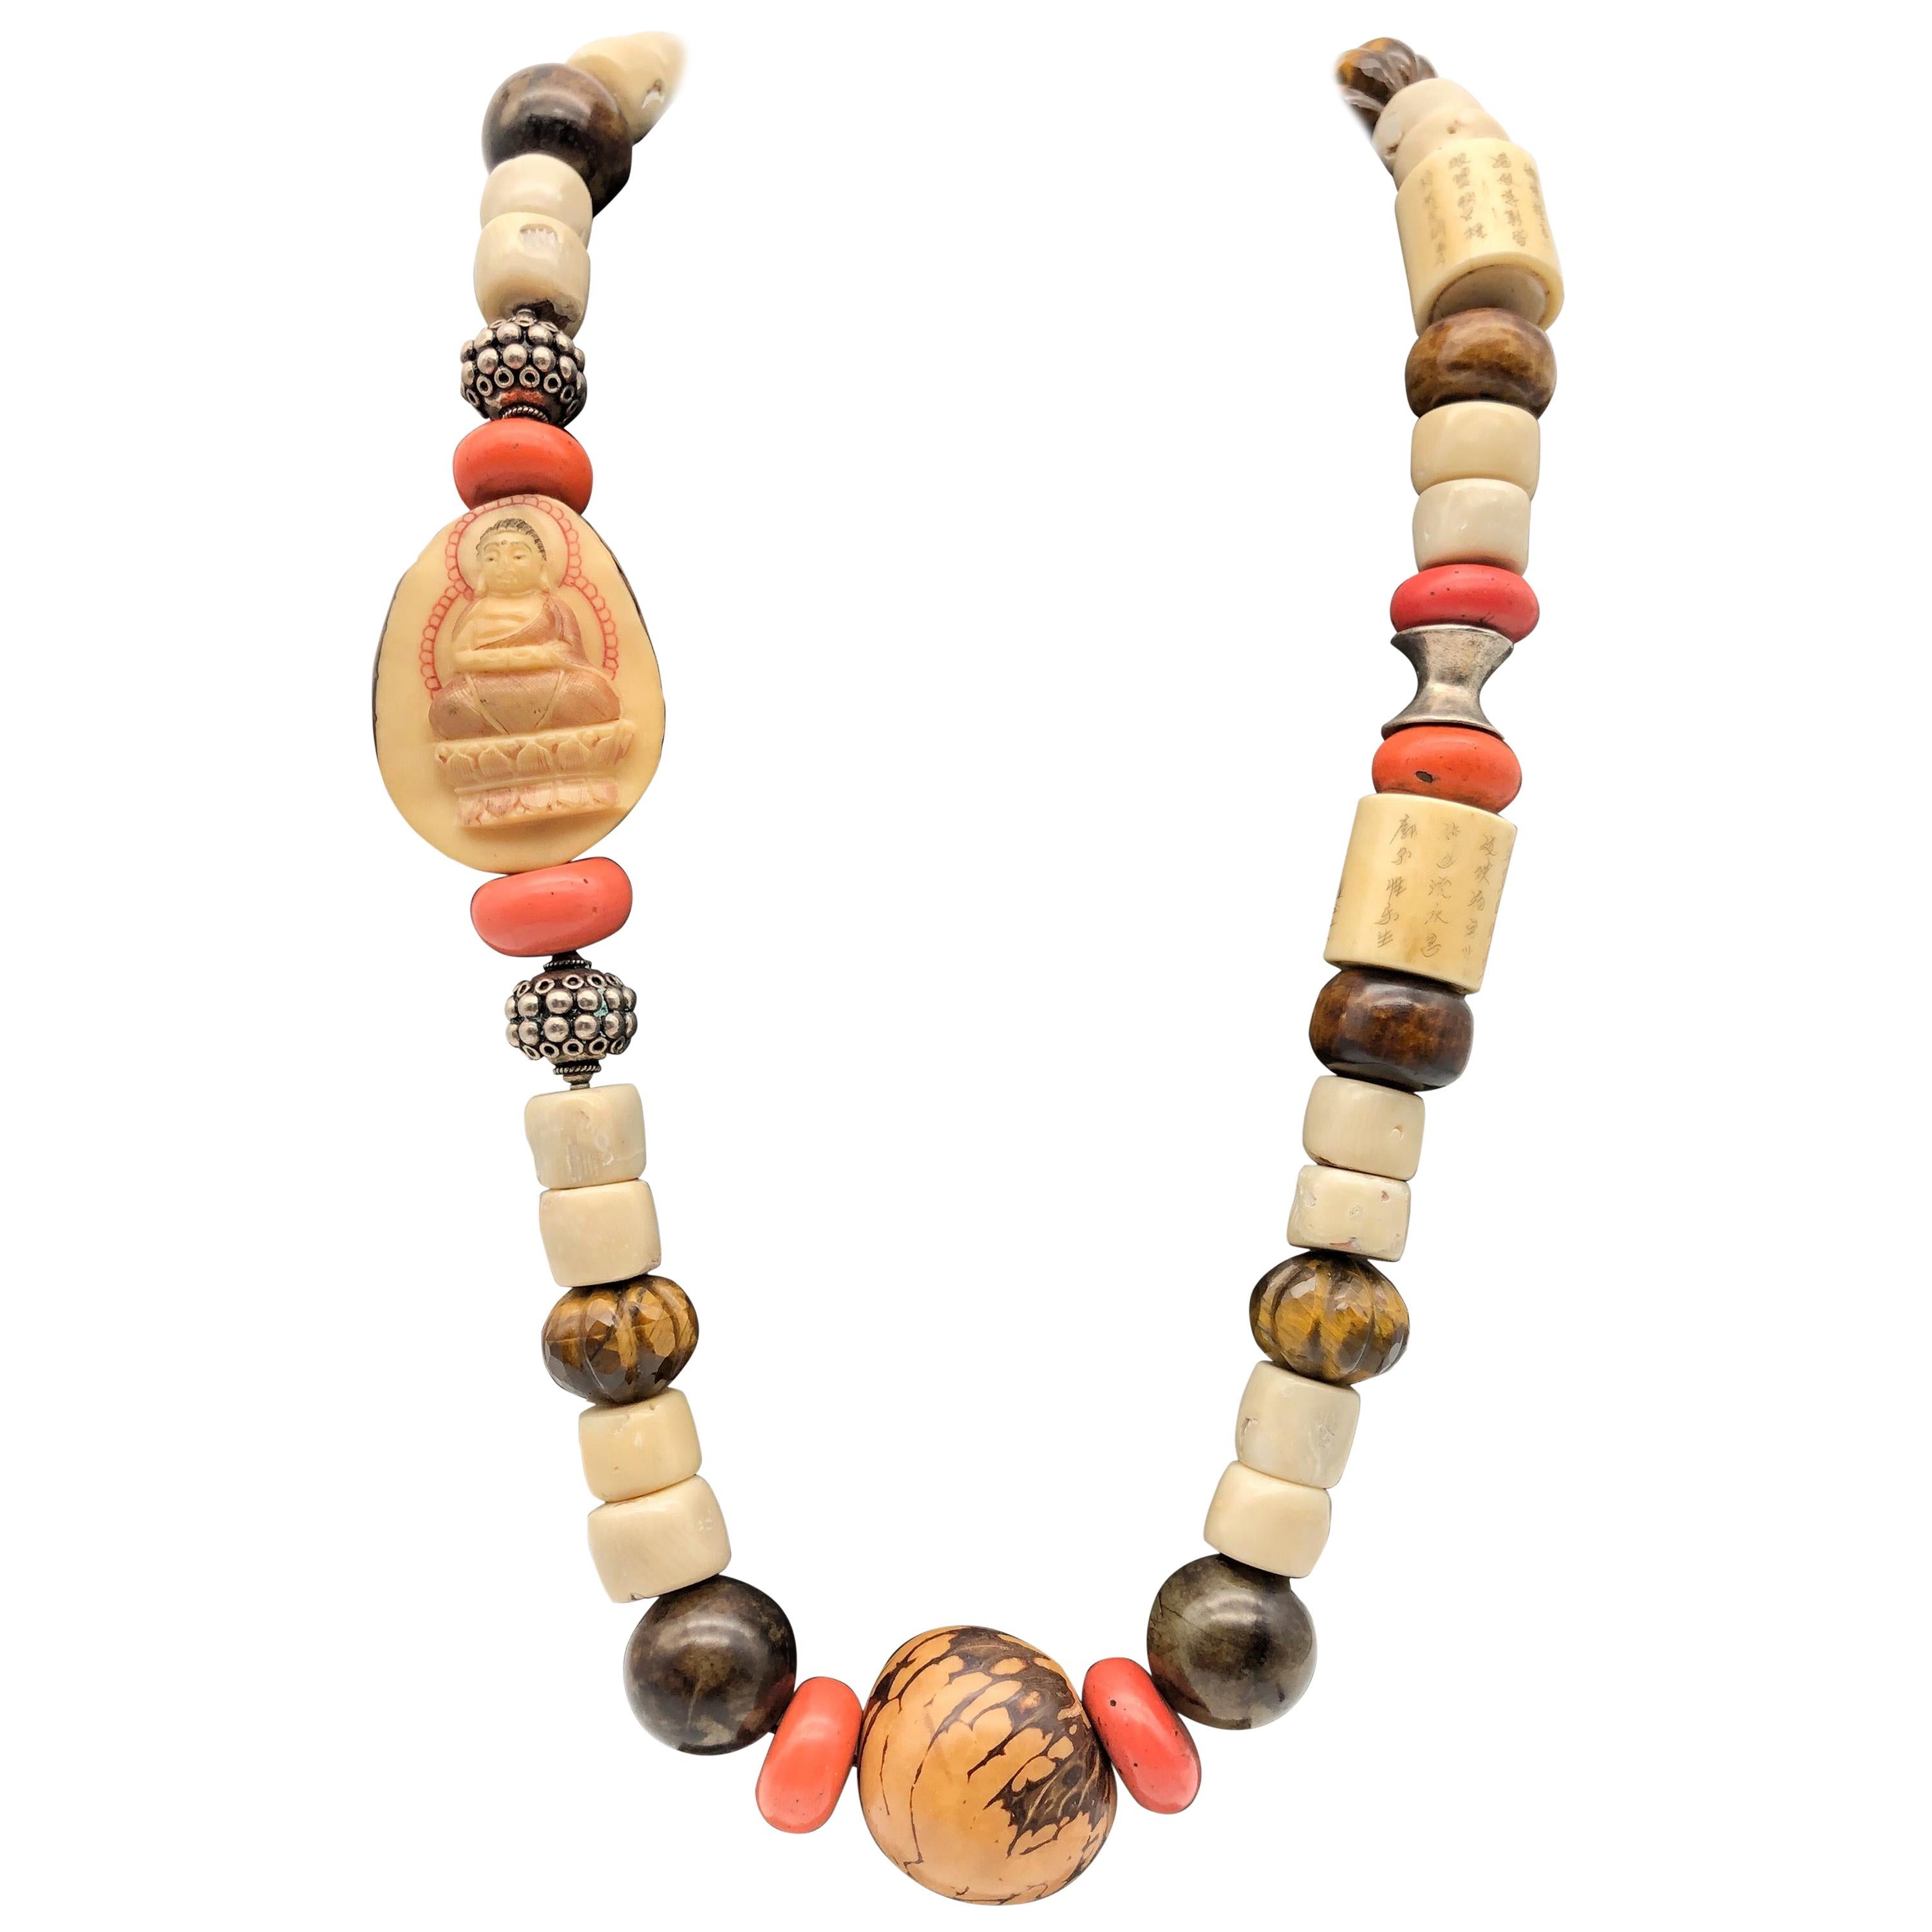 A.Jeschel Colorful Ethnic Tibetan beads and Carved Buddha necklace